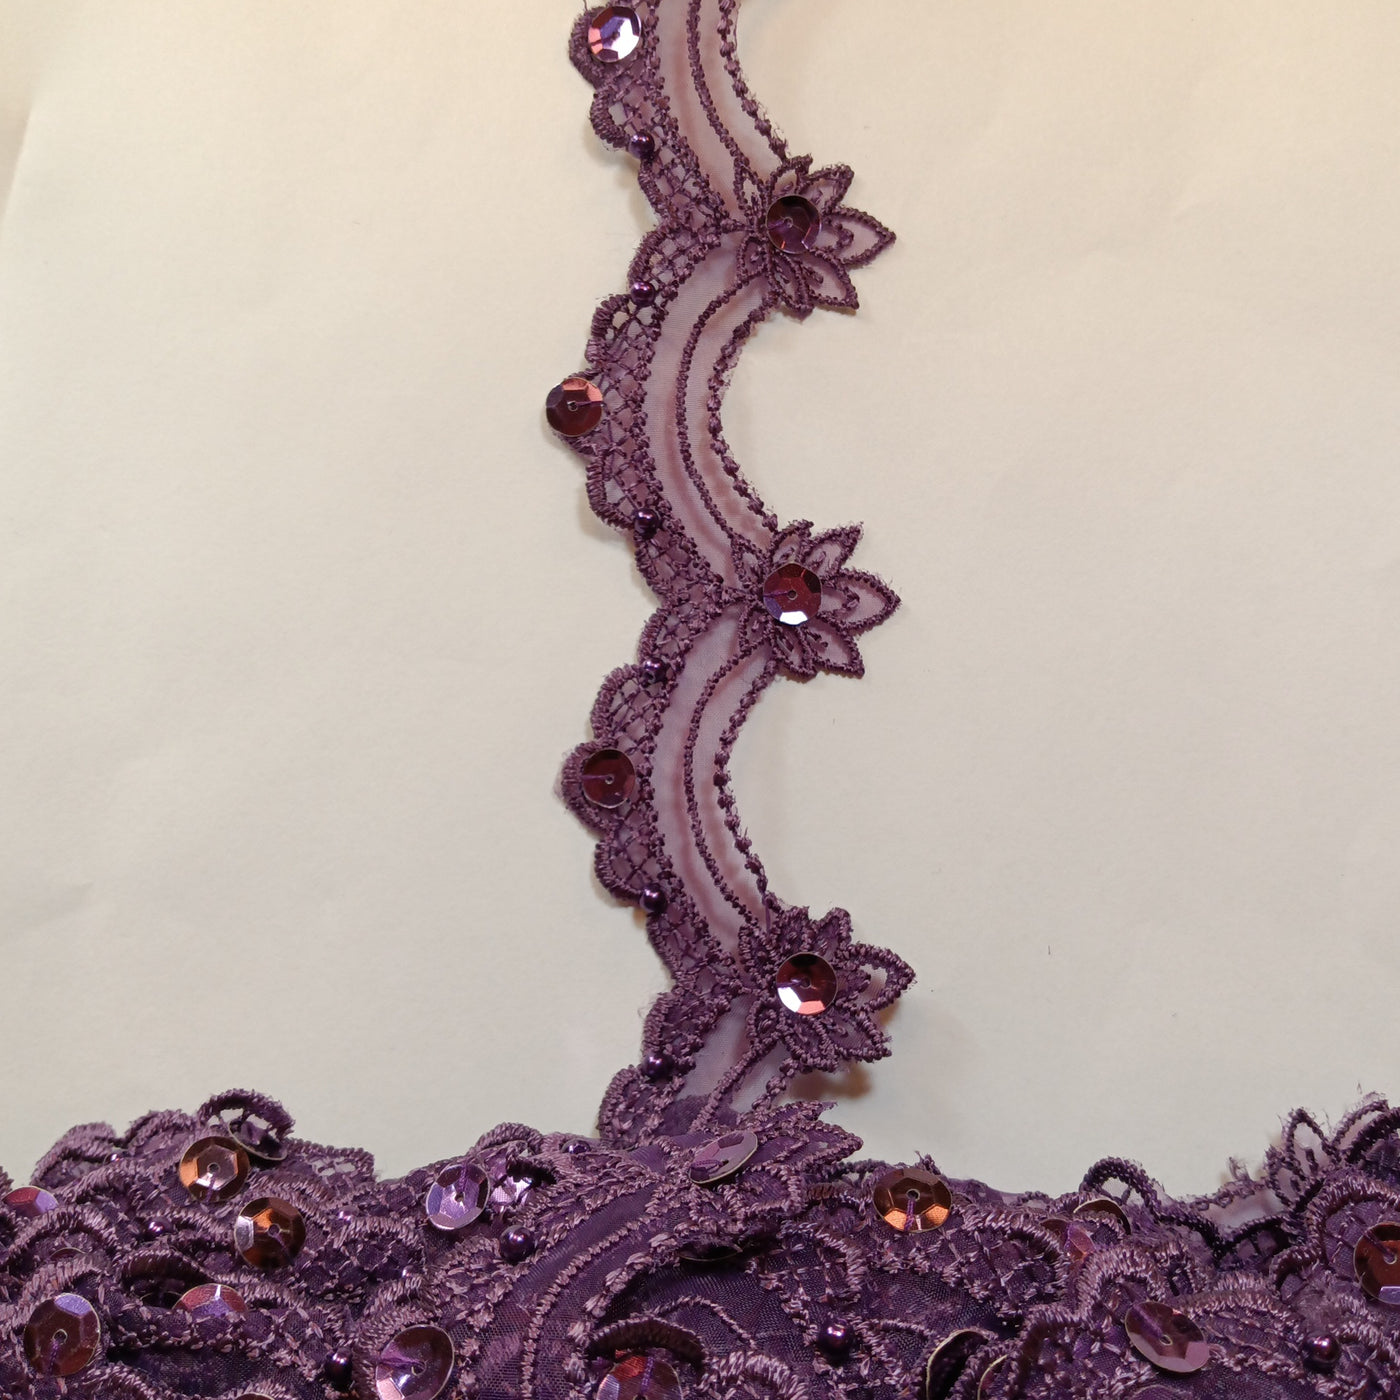 Beaded Plum Lace Trim Embroidered on 100% Polyester Organza . Large Arch Scalloped Trim. Formal Trim. Perfect for Edging and Gowns.  Sold by the Yard.  Lace Usa